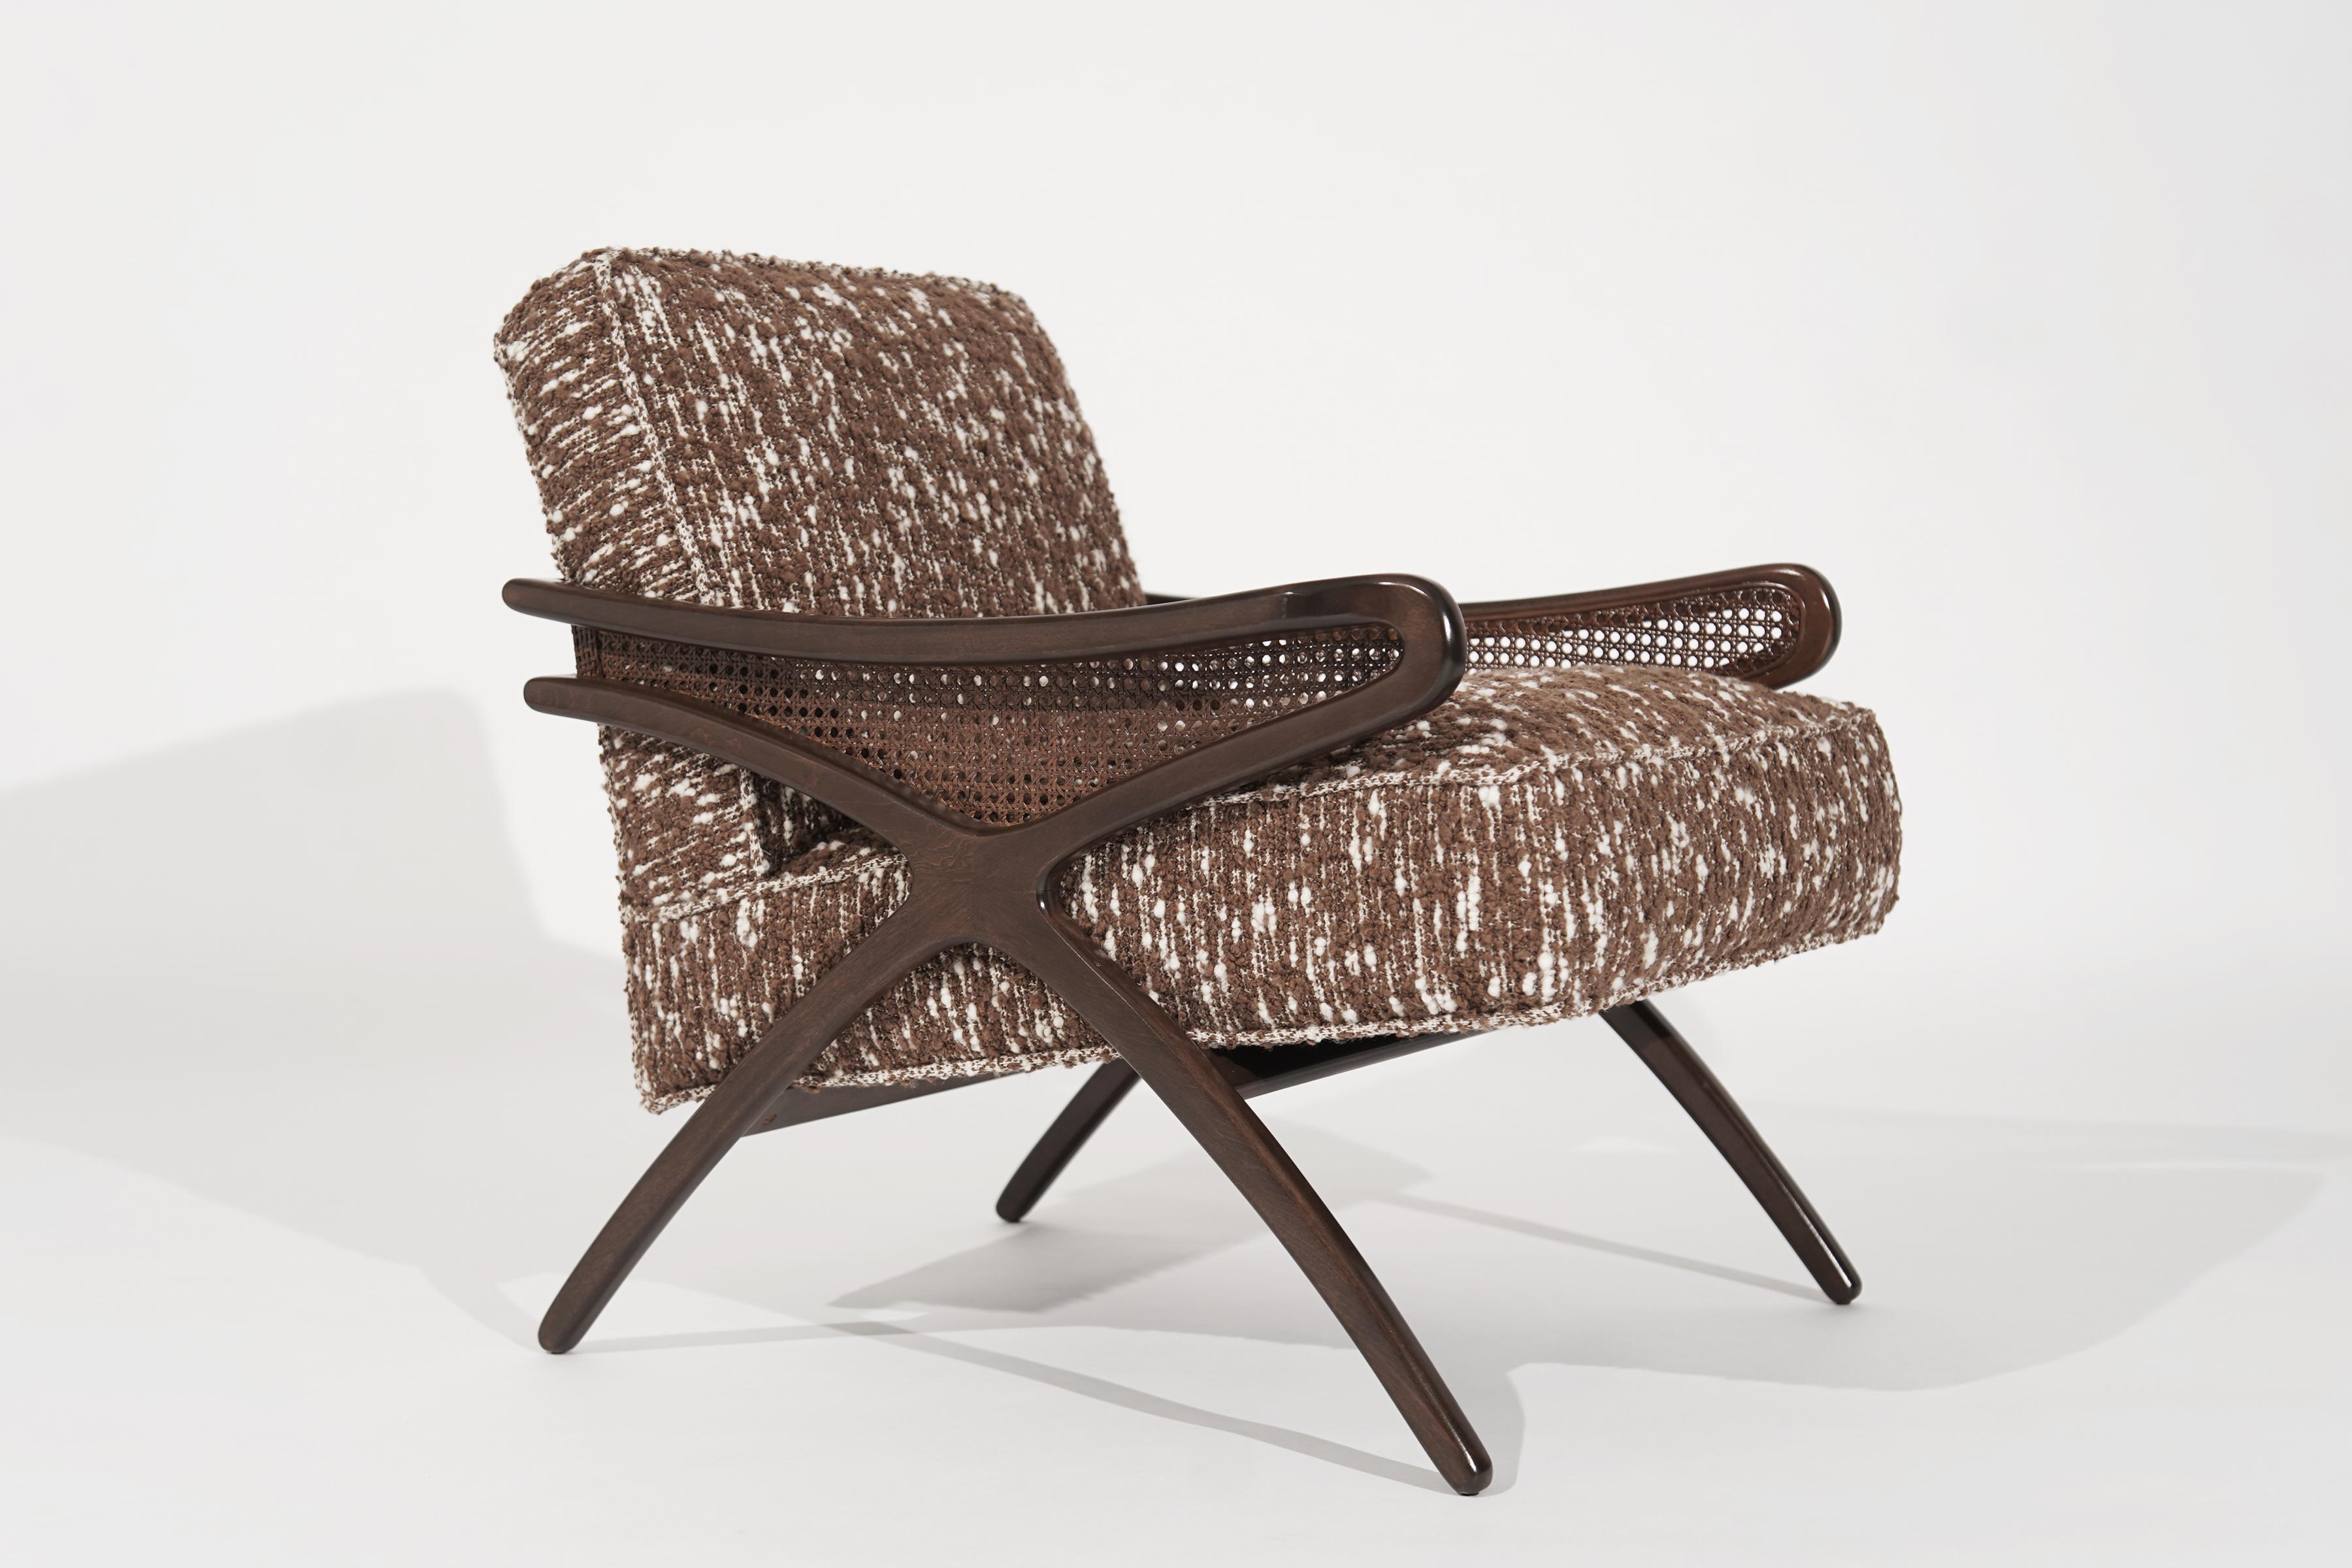 American Mid-Century Modern Butterfly Lounge Chair, circa 1960s